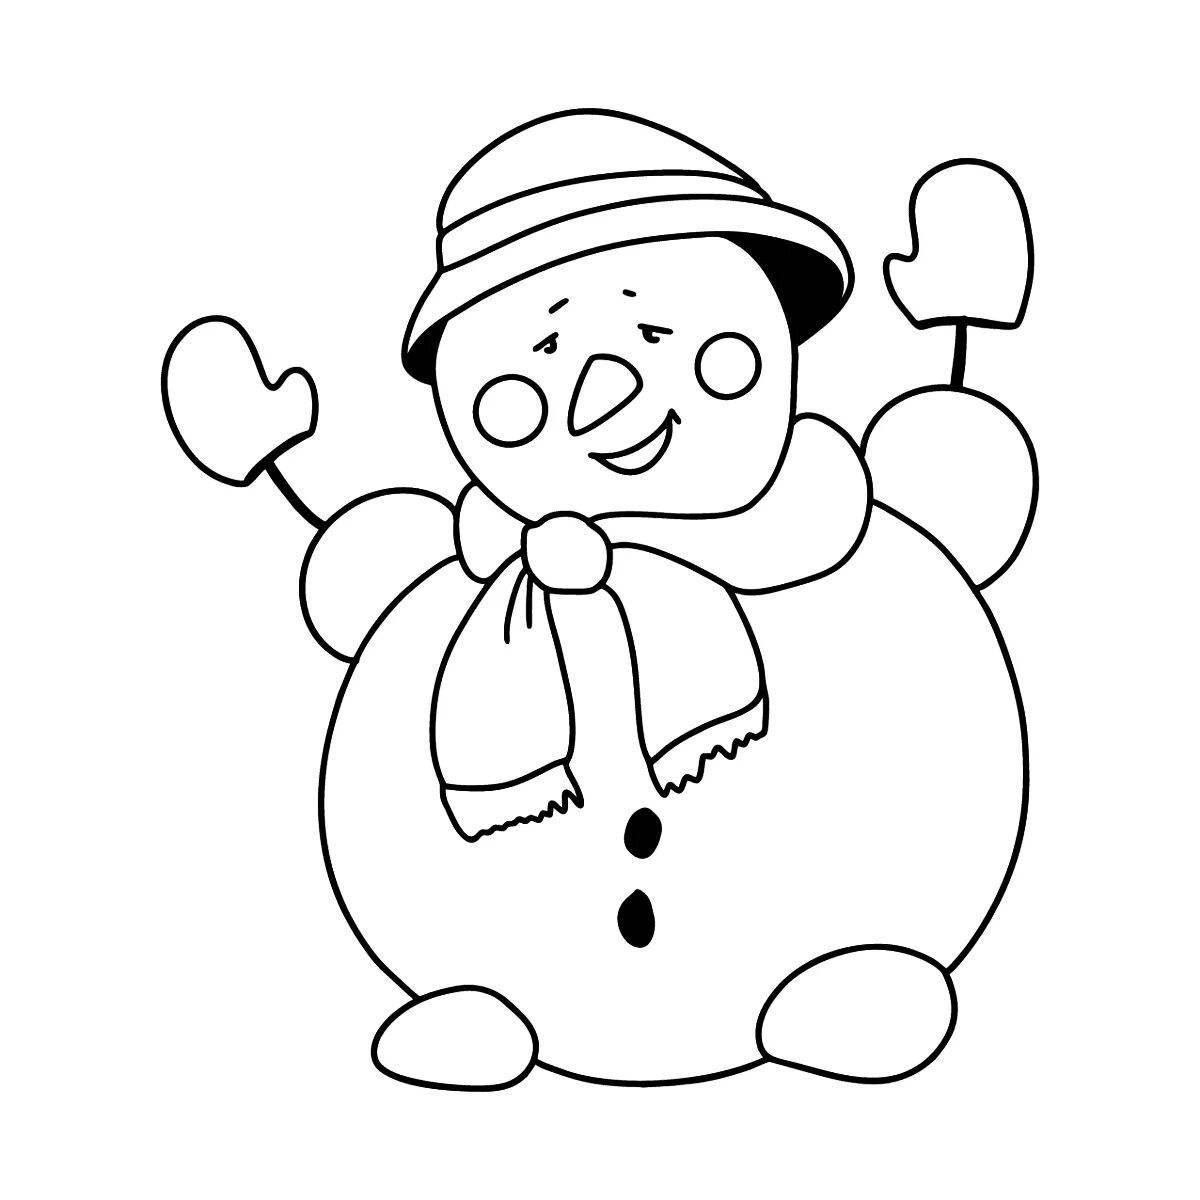 Adorable snowman coloring book for kids 3 4